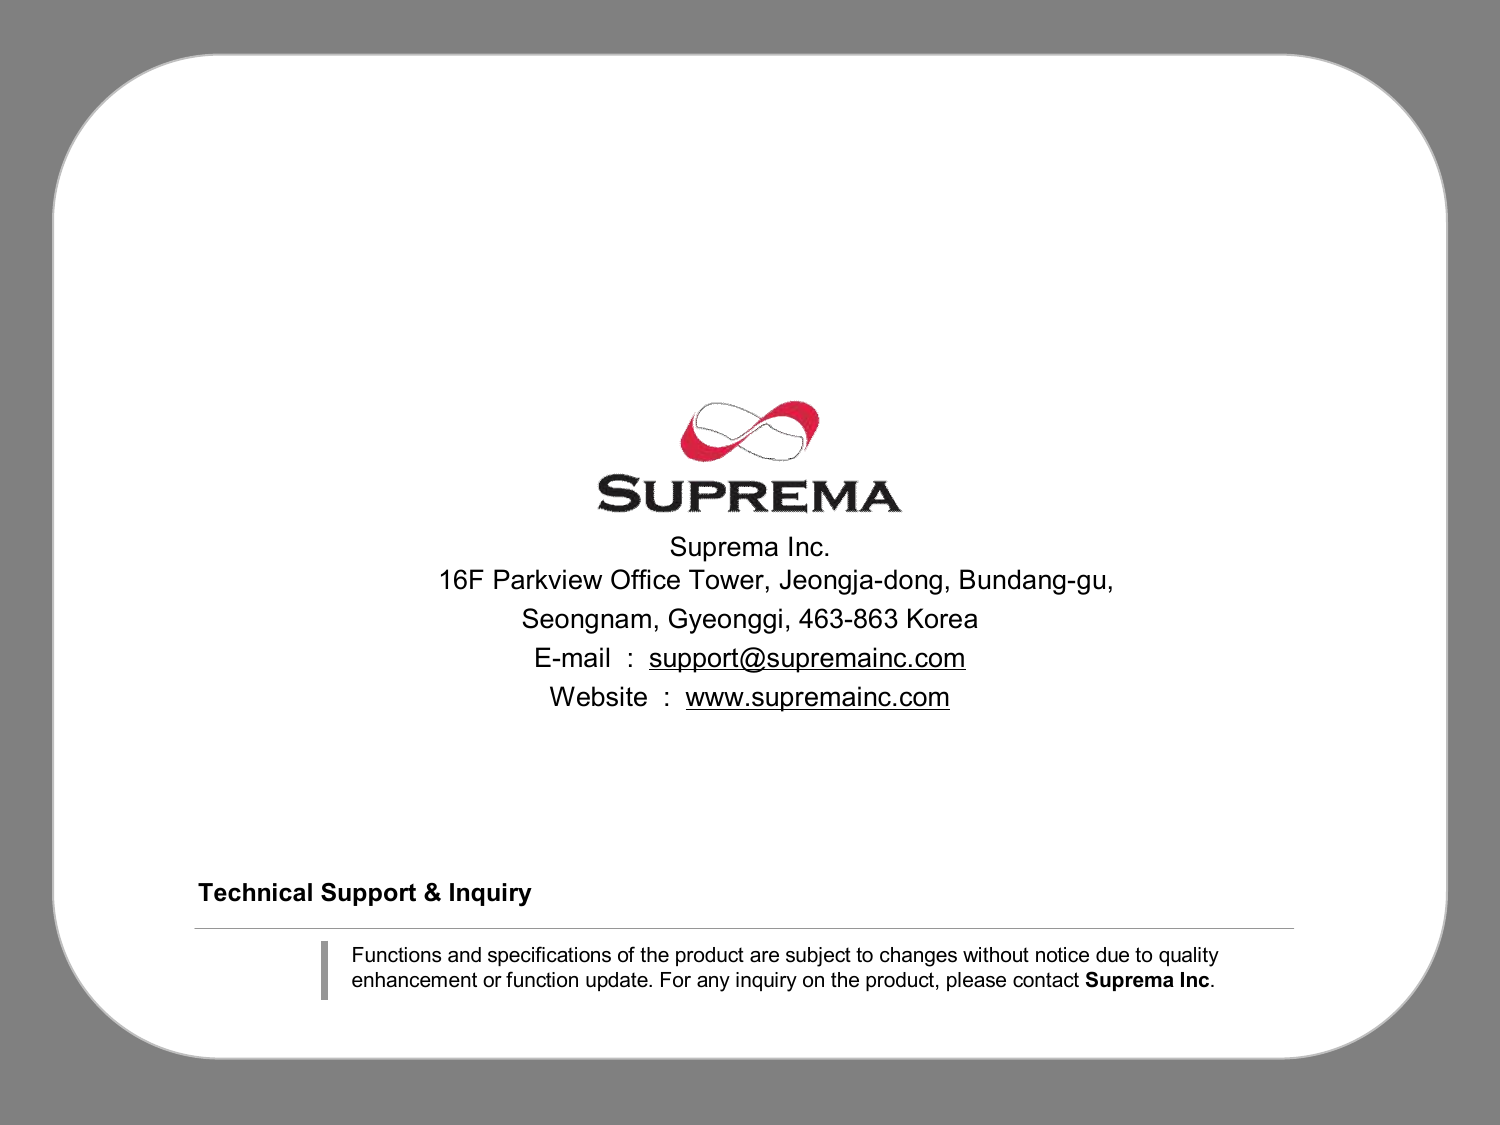 Technical Support &amp; InquirySuprema Inc.16F Parkview Office Tower, Jeongja-dong, Bundang-gu, Seongnam, Gyeonggi, 463-863 KoreaE-mail  :  support@supremainc.comWebsite  :  www.supremainc.comFunctions and specifications of the product are subject to changes without notice due to quality enhancement or function update. For any inquiry on the product, please contact Suprema Inc.